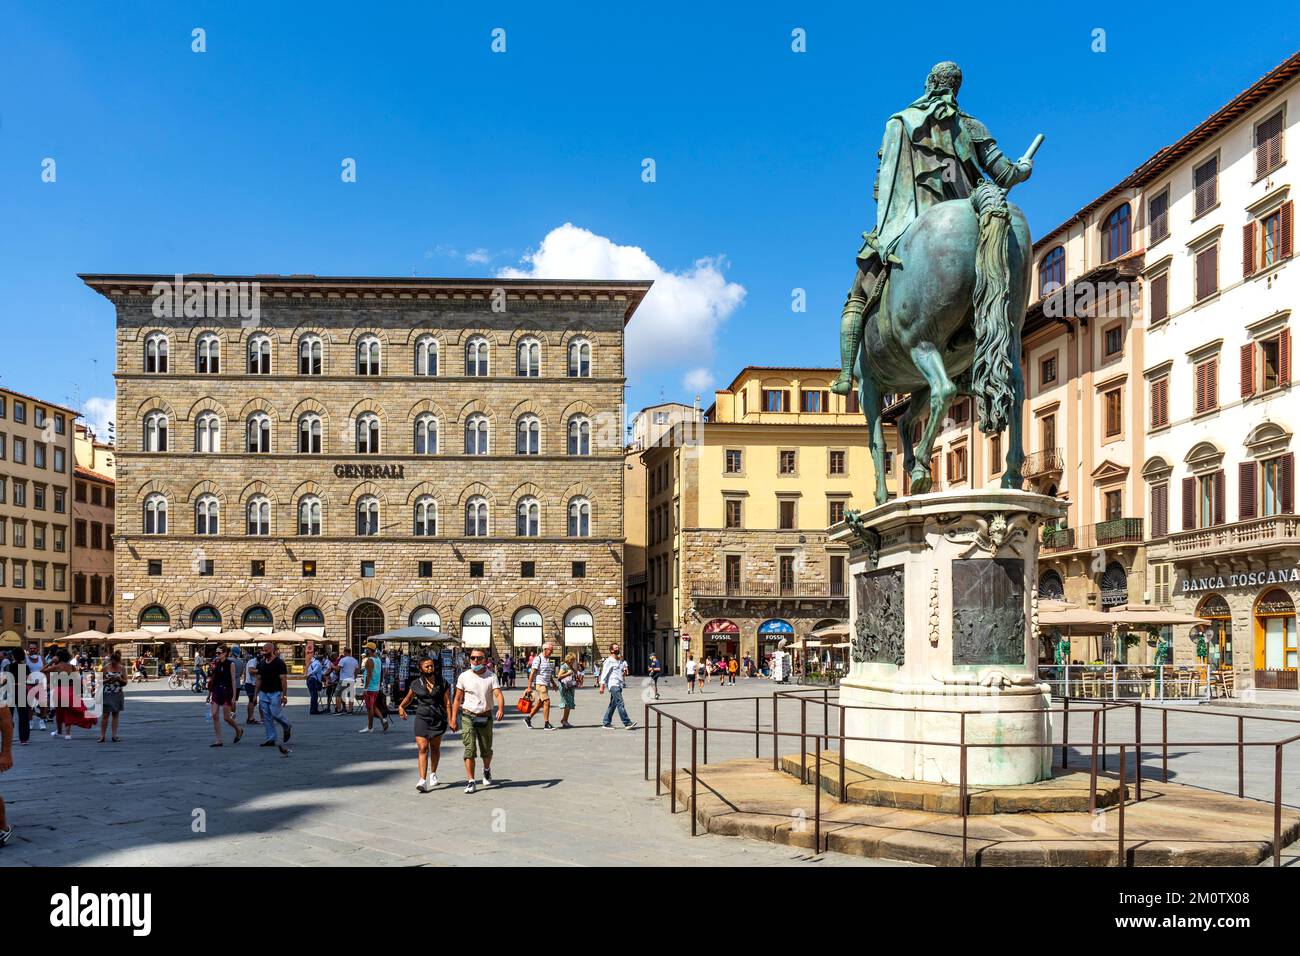 Equestrian monument of Cosimo I, bronze statue sculpted by Giambologna and erected in 1594, located in Signoria square, Florence, Tuscany, Italy Stock Photo